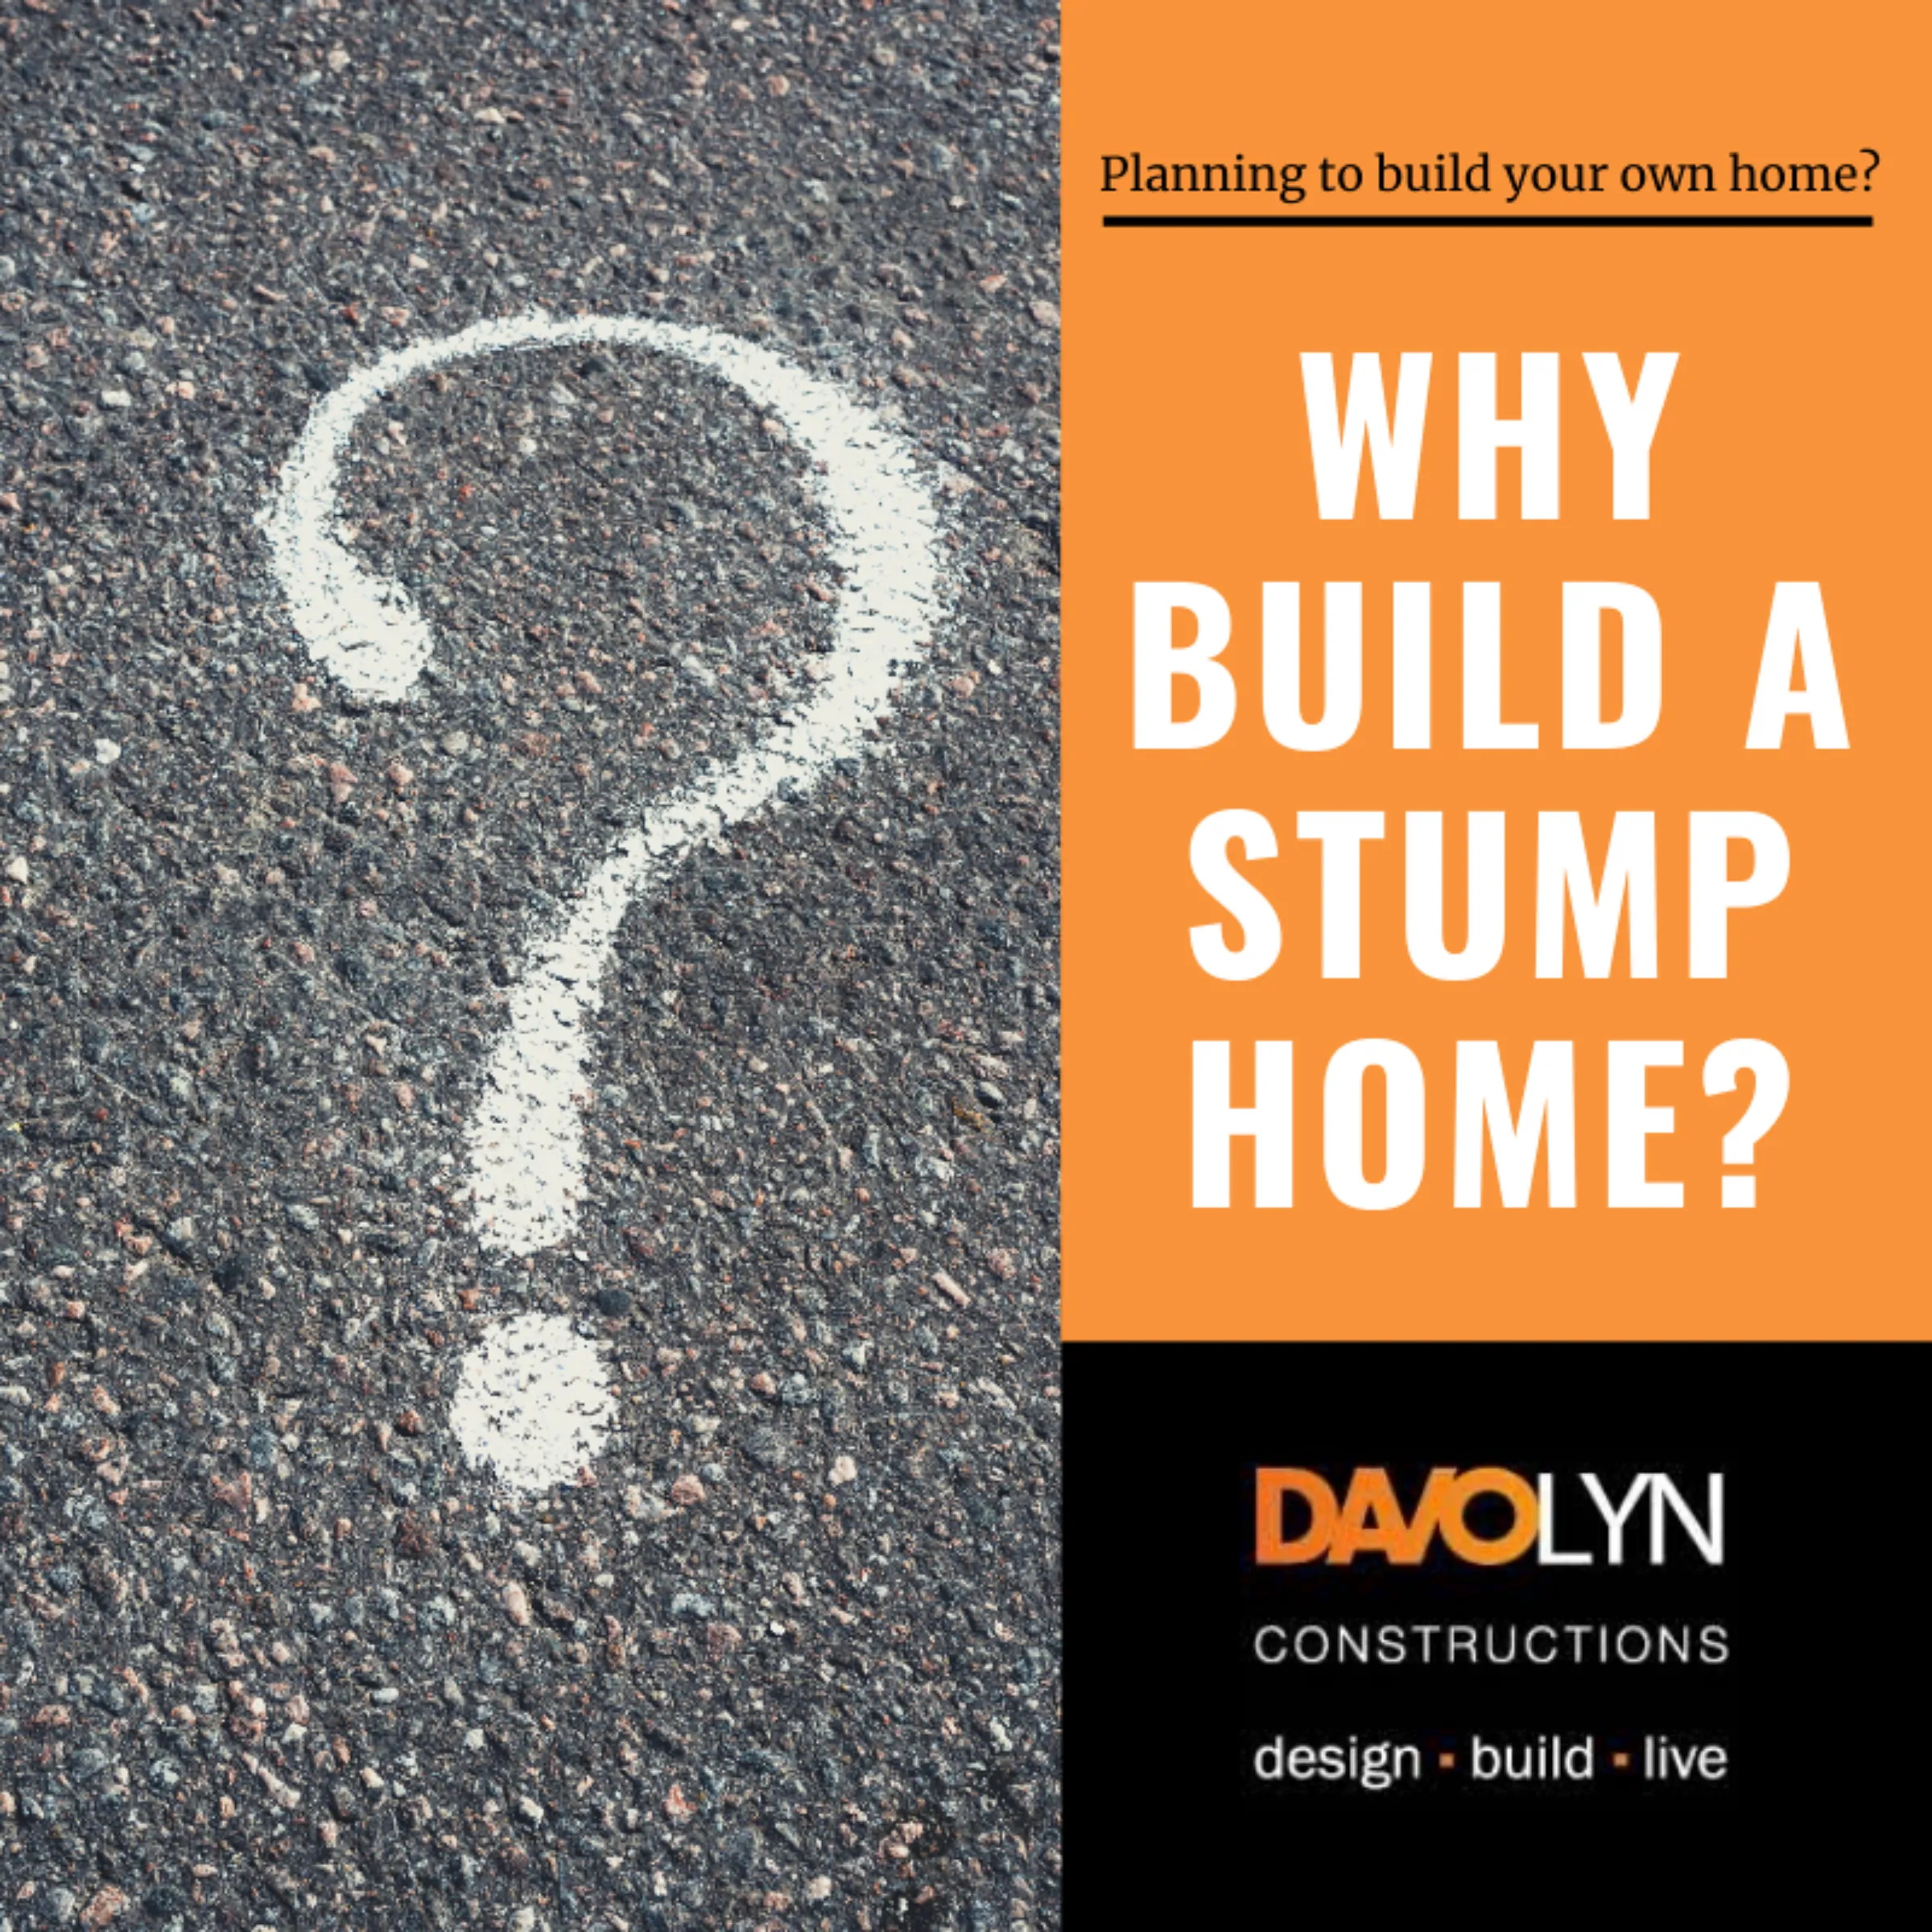 Why Build a Stump Home